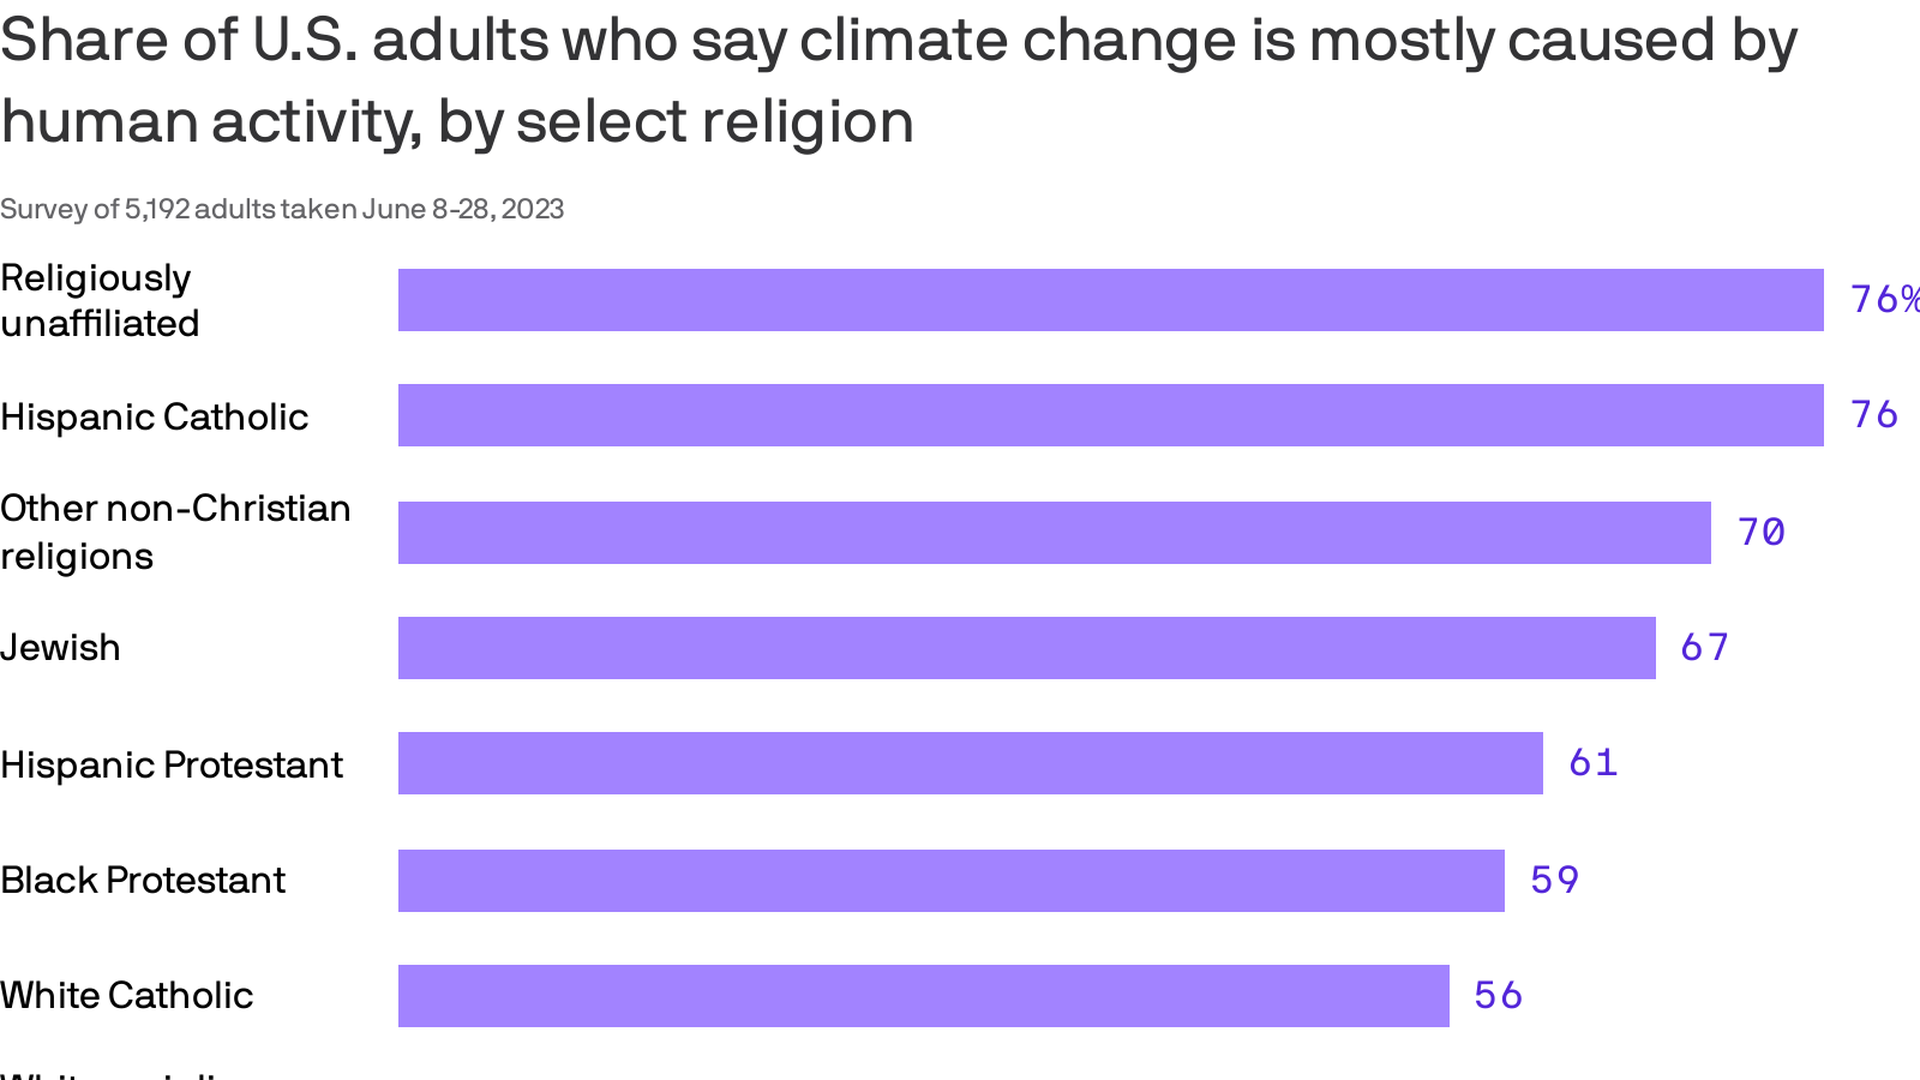 Share of U.S. adults who say climate change is mostly caused by human activity, by select religion